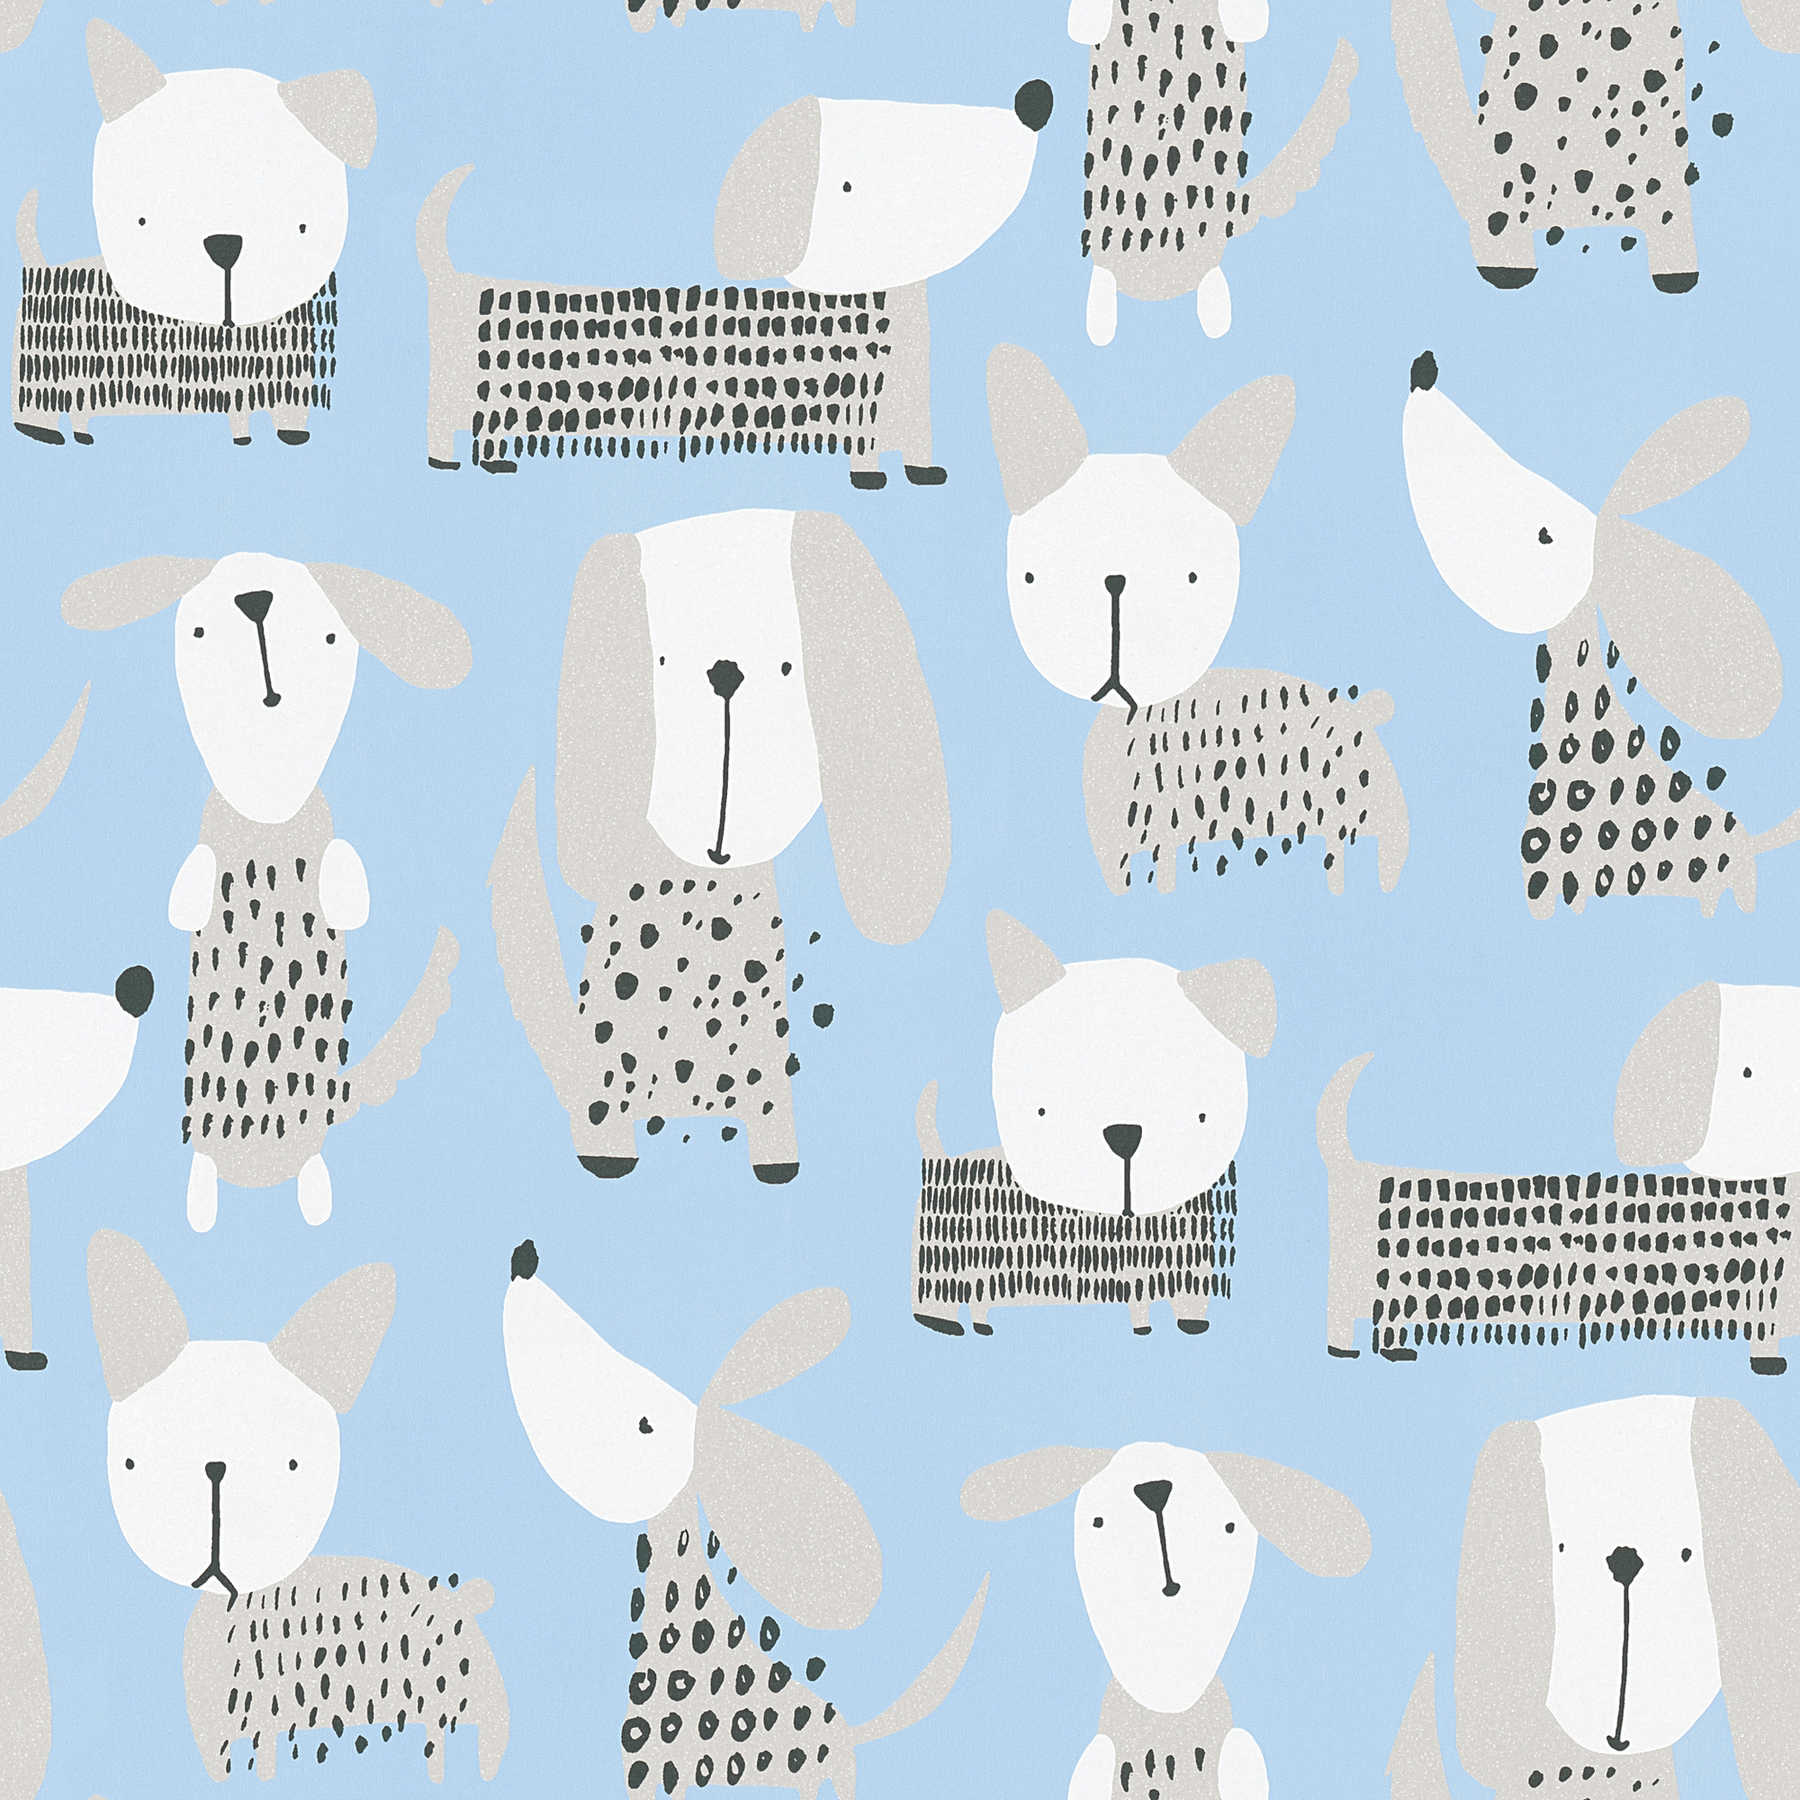             Paper wallpaper with dogs in comic style- blue, white
        